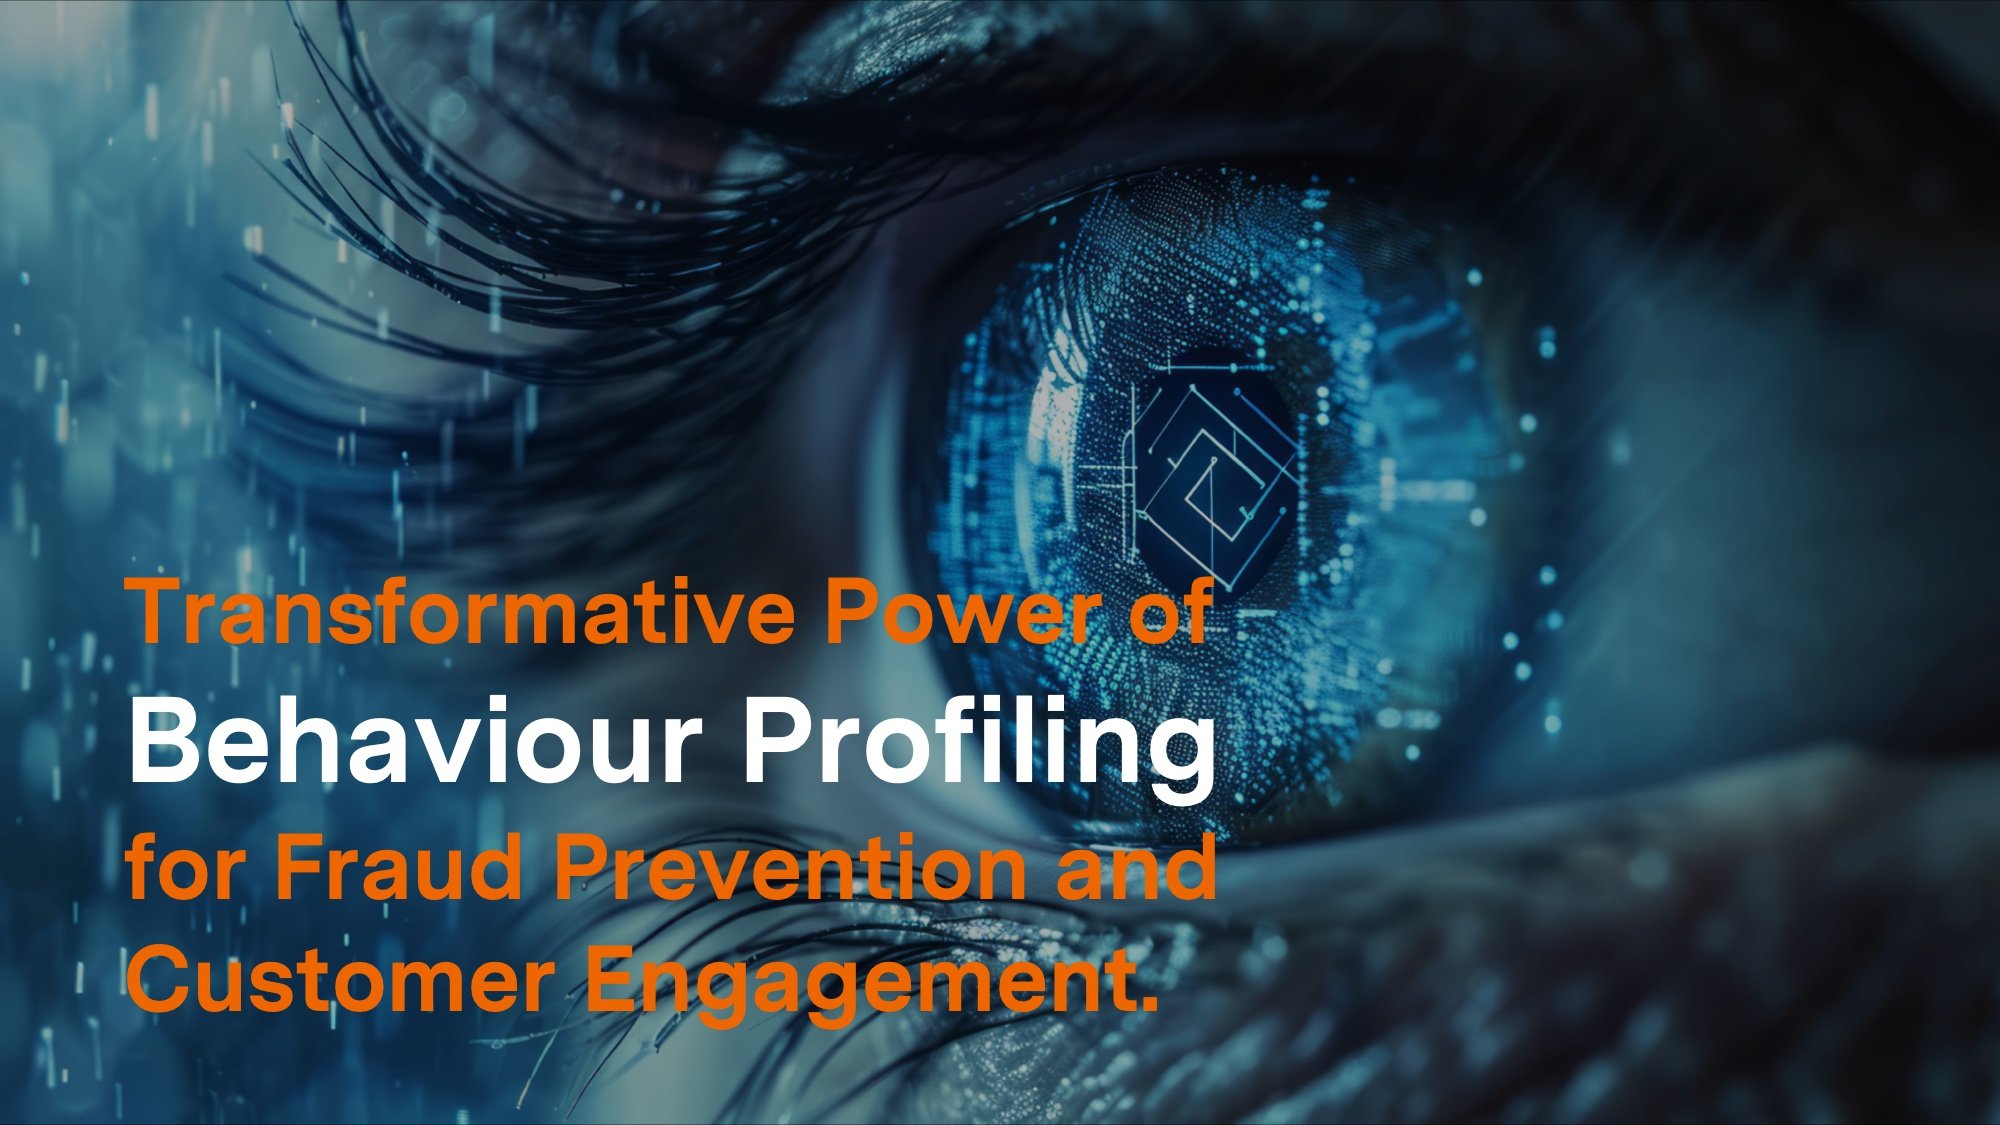 The Transformative Power of Behaviour Profiling for Fraud Prevention and Customer Engagement